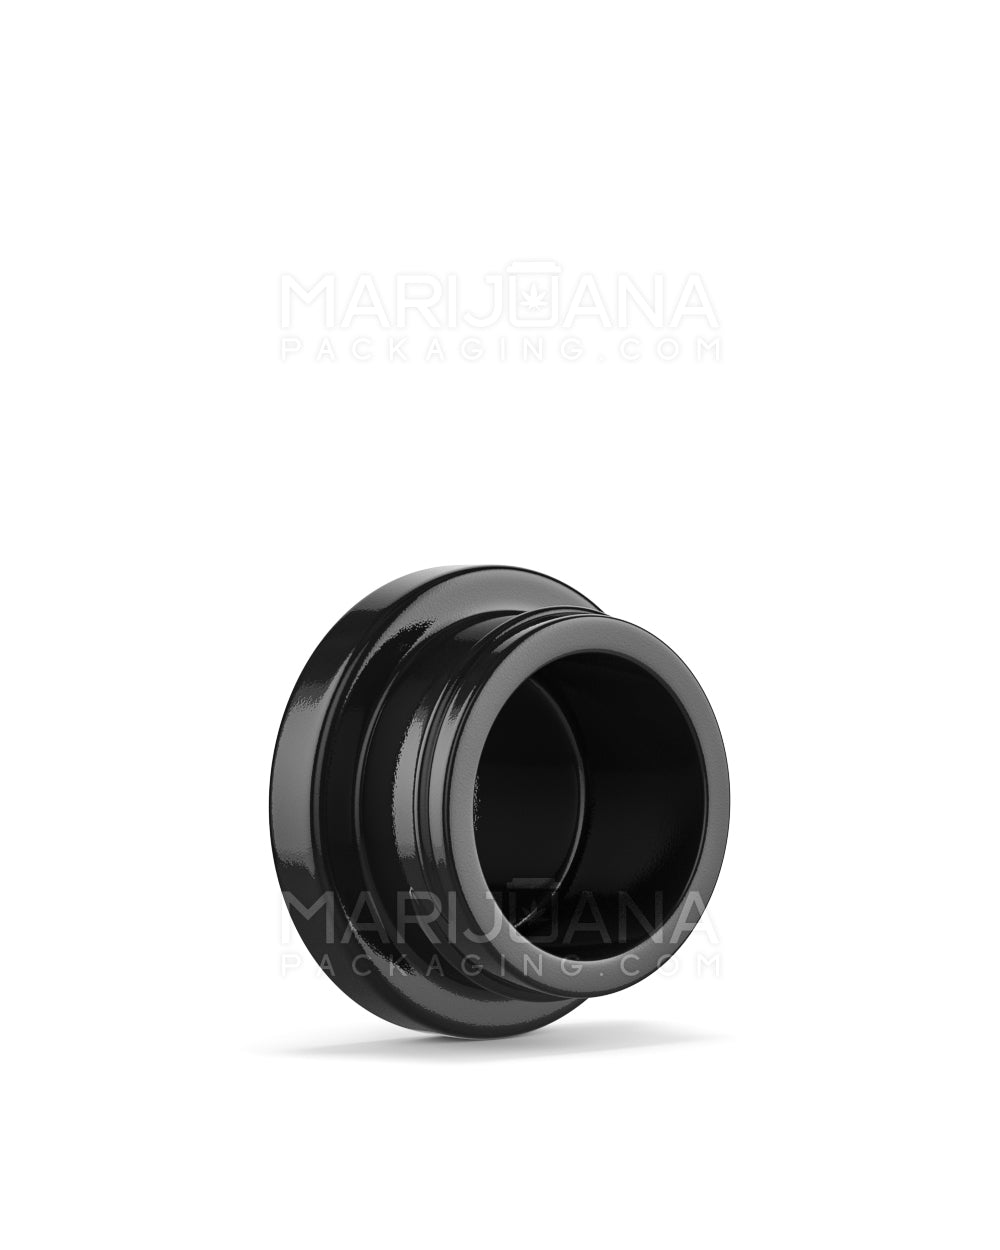 Child Resistant | Black Glass Concentrate Jar with Black Cap | 38mm - 9mL - 320 Count - 4